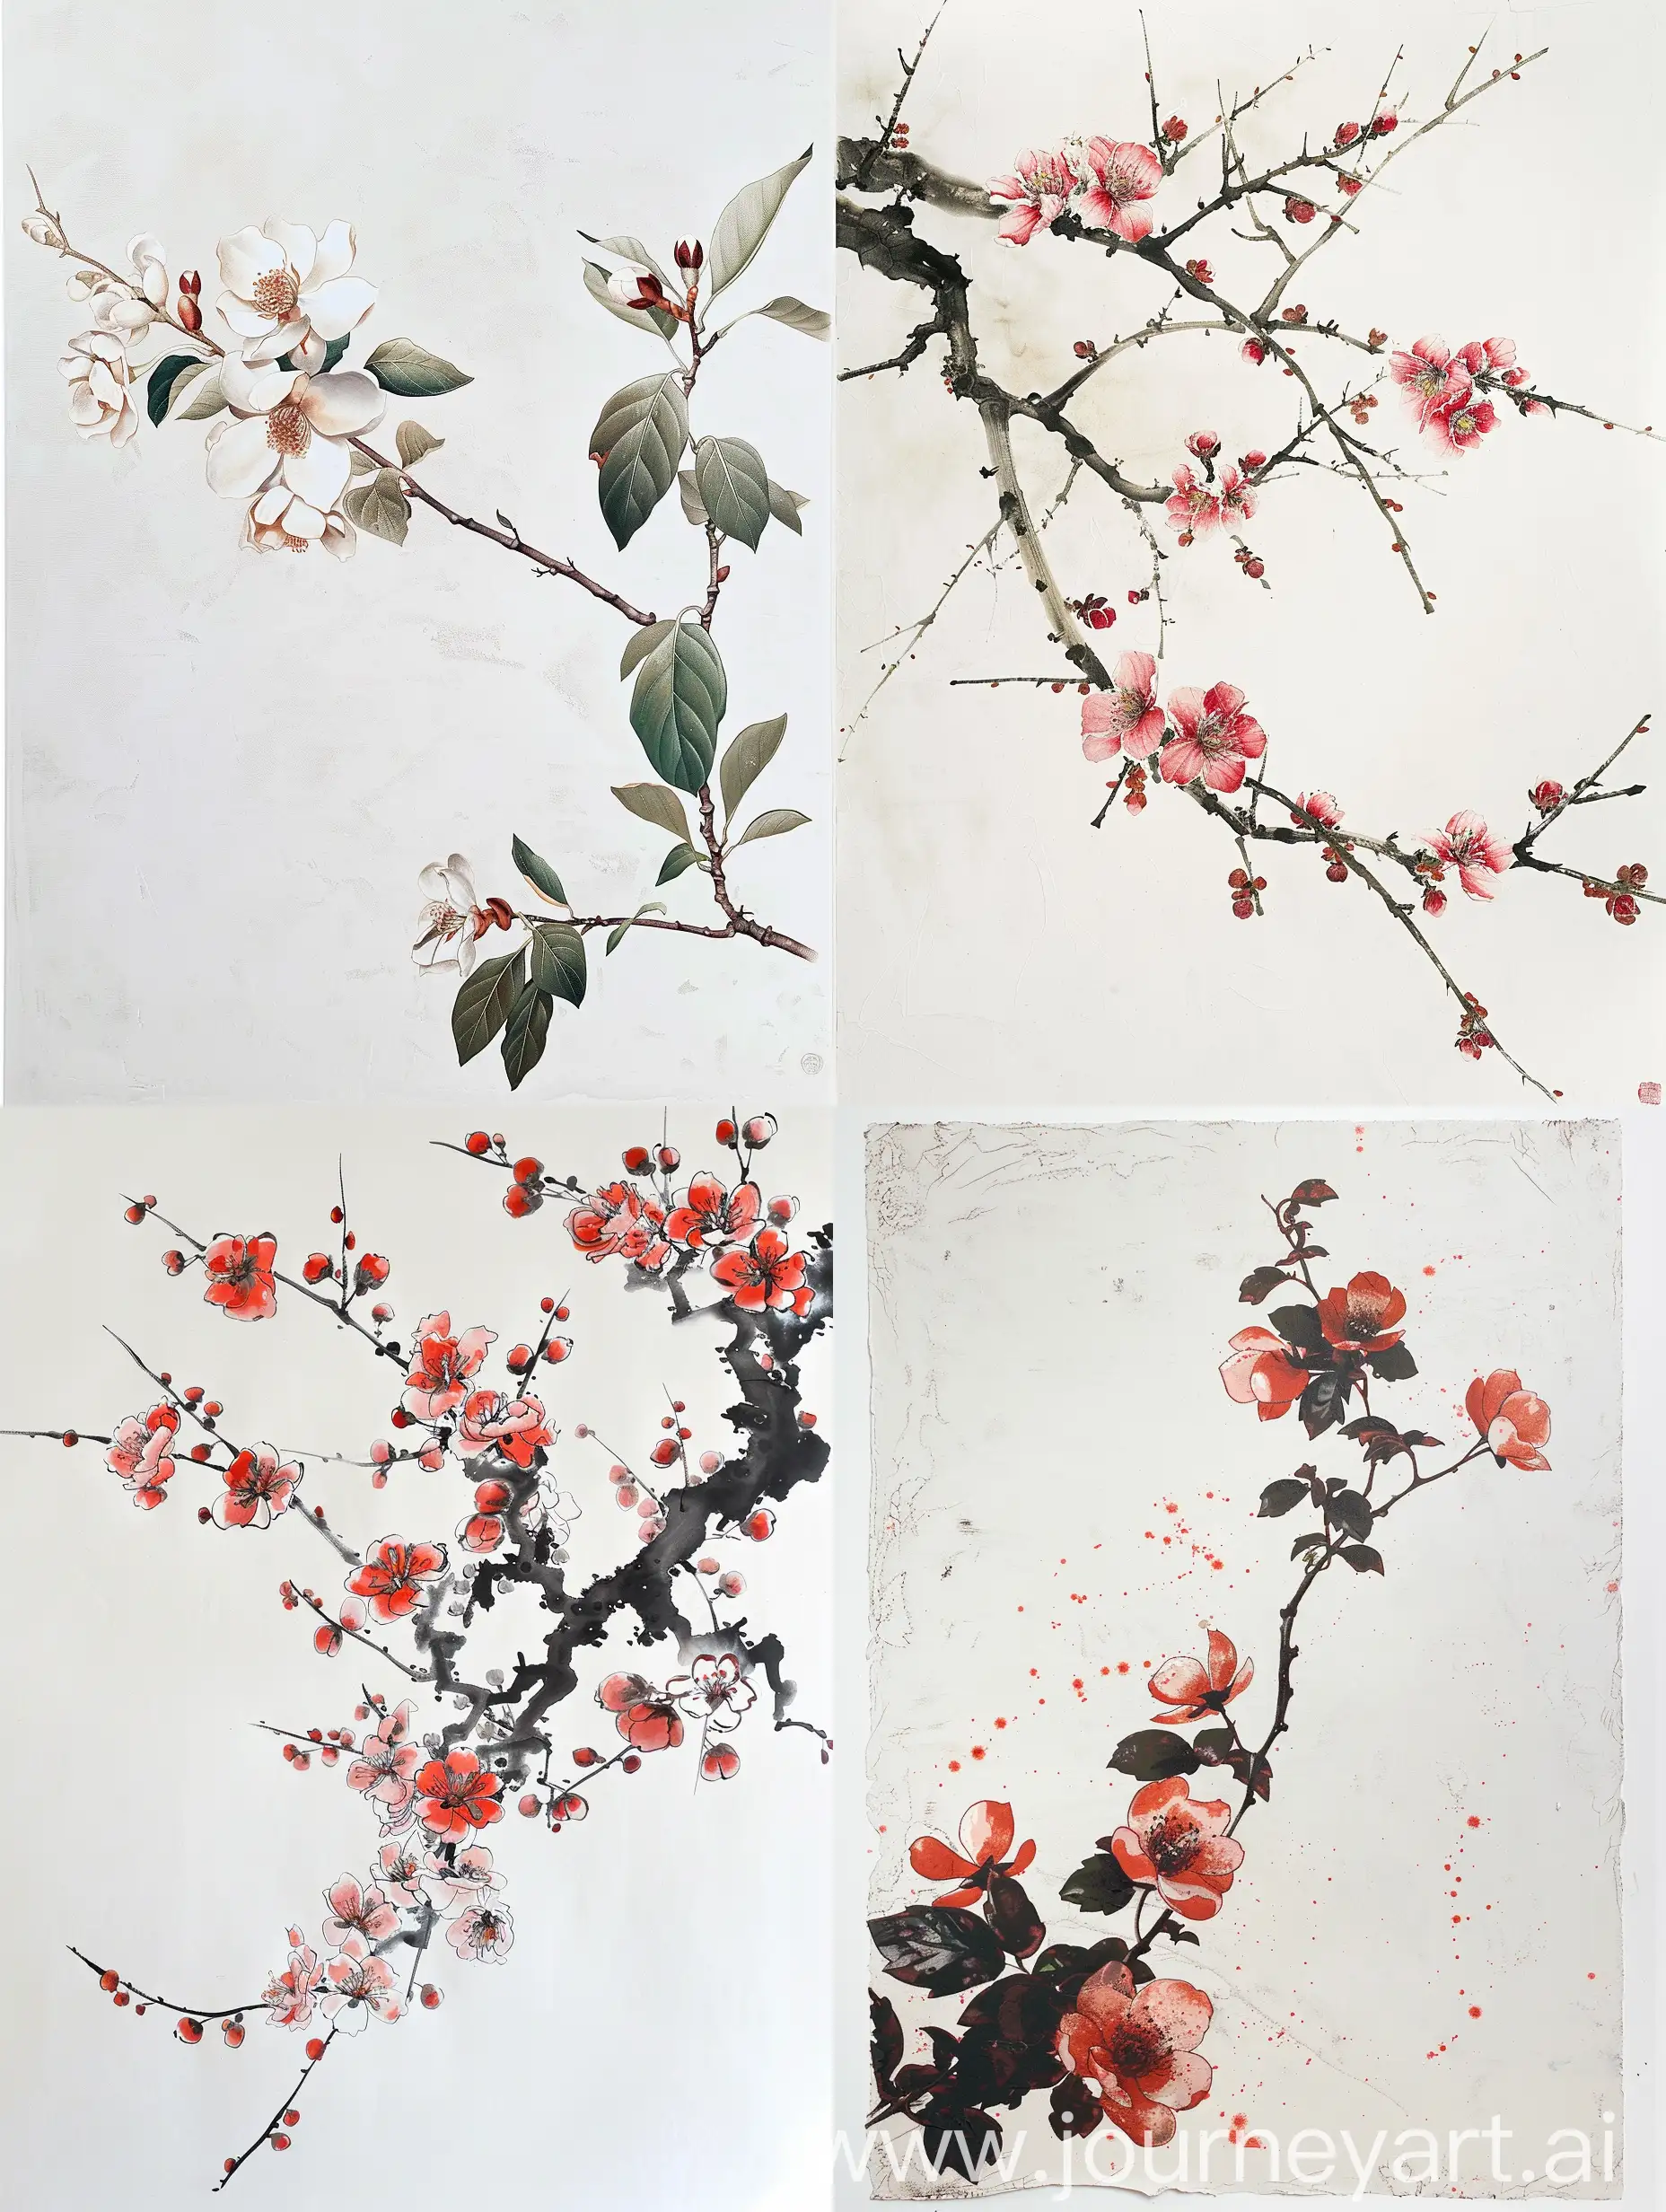 A painting of a flower branch on a white background